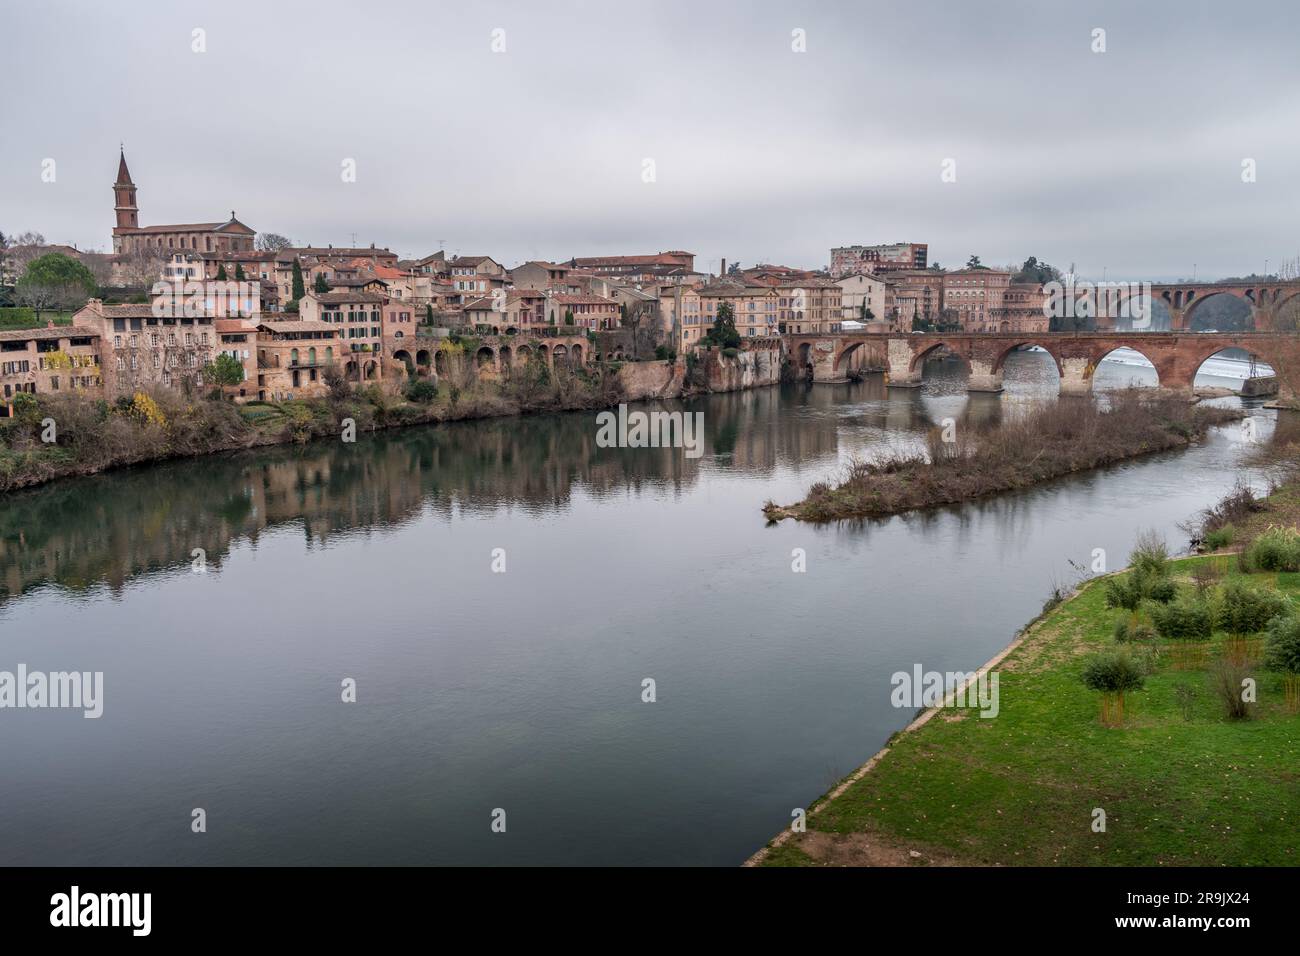 View of Albi, the city and historic buildings from the River Tarn, the Pont Vieux and an island in the stream. Stock Photo